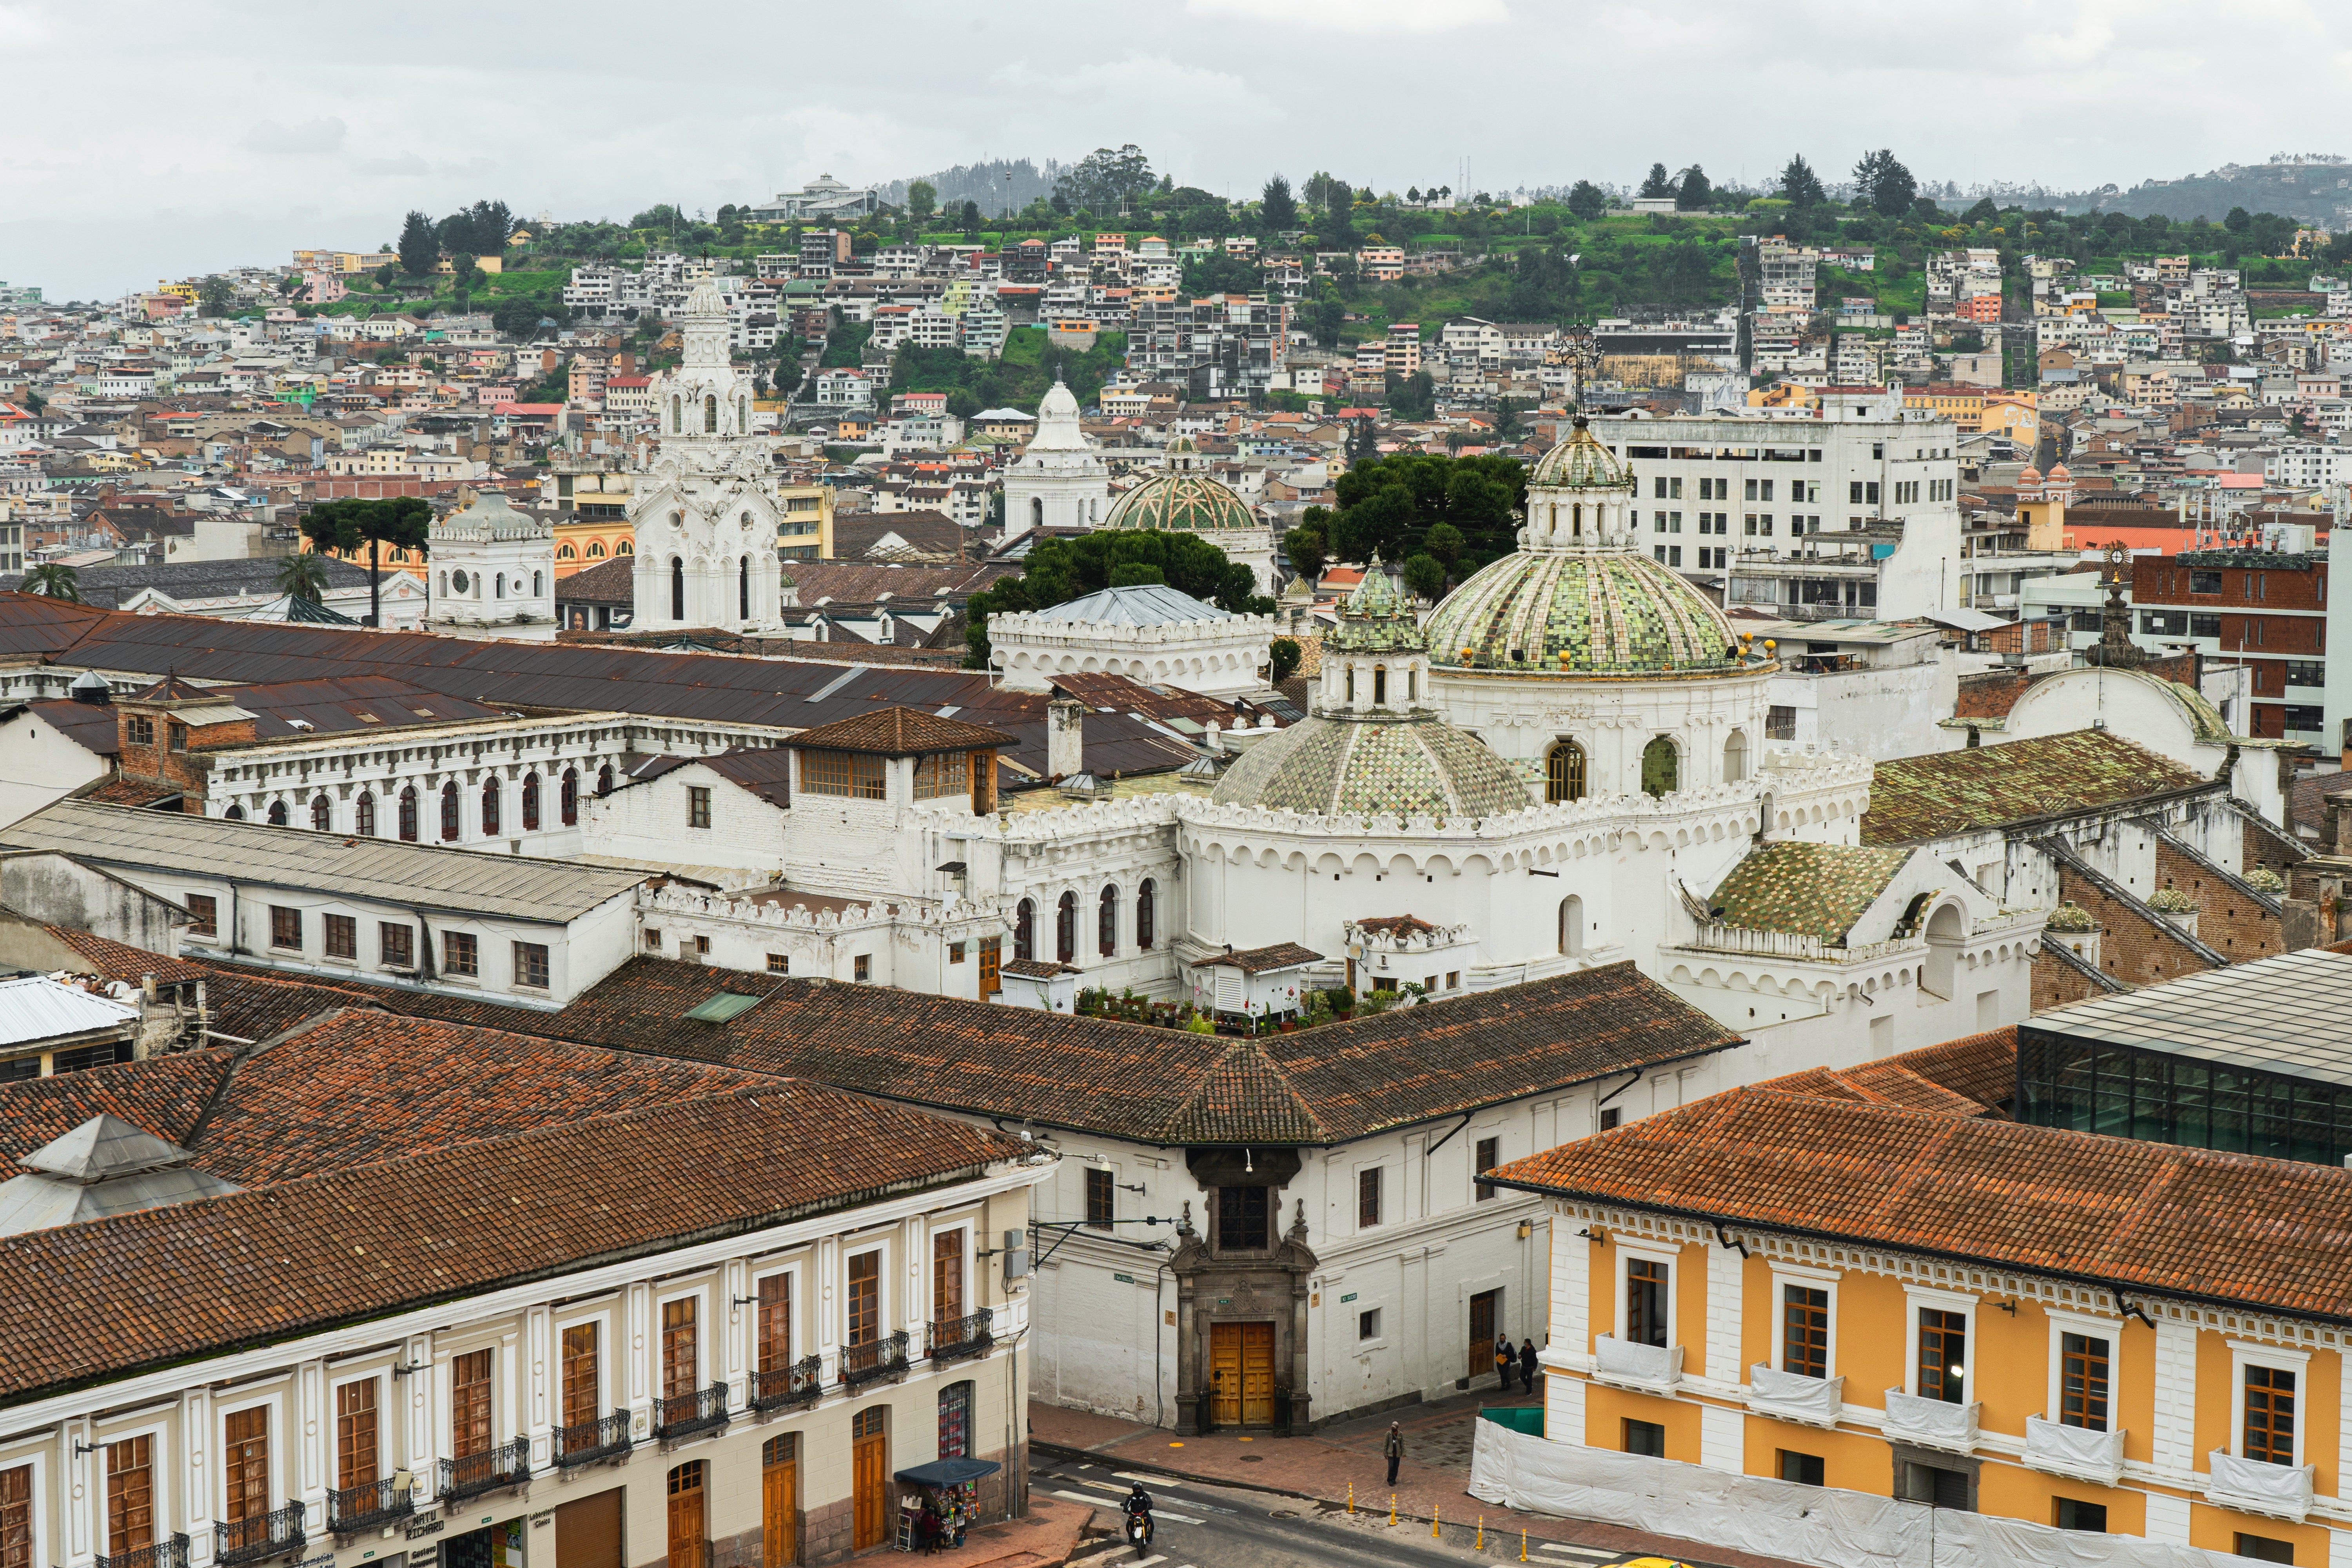 Quito was officially established in 1534